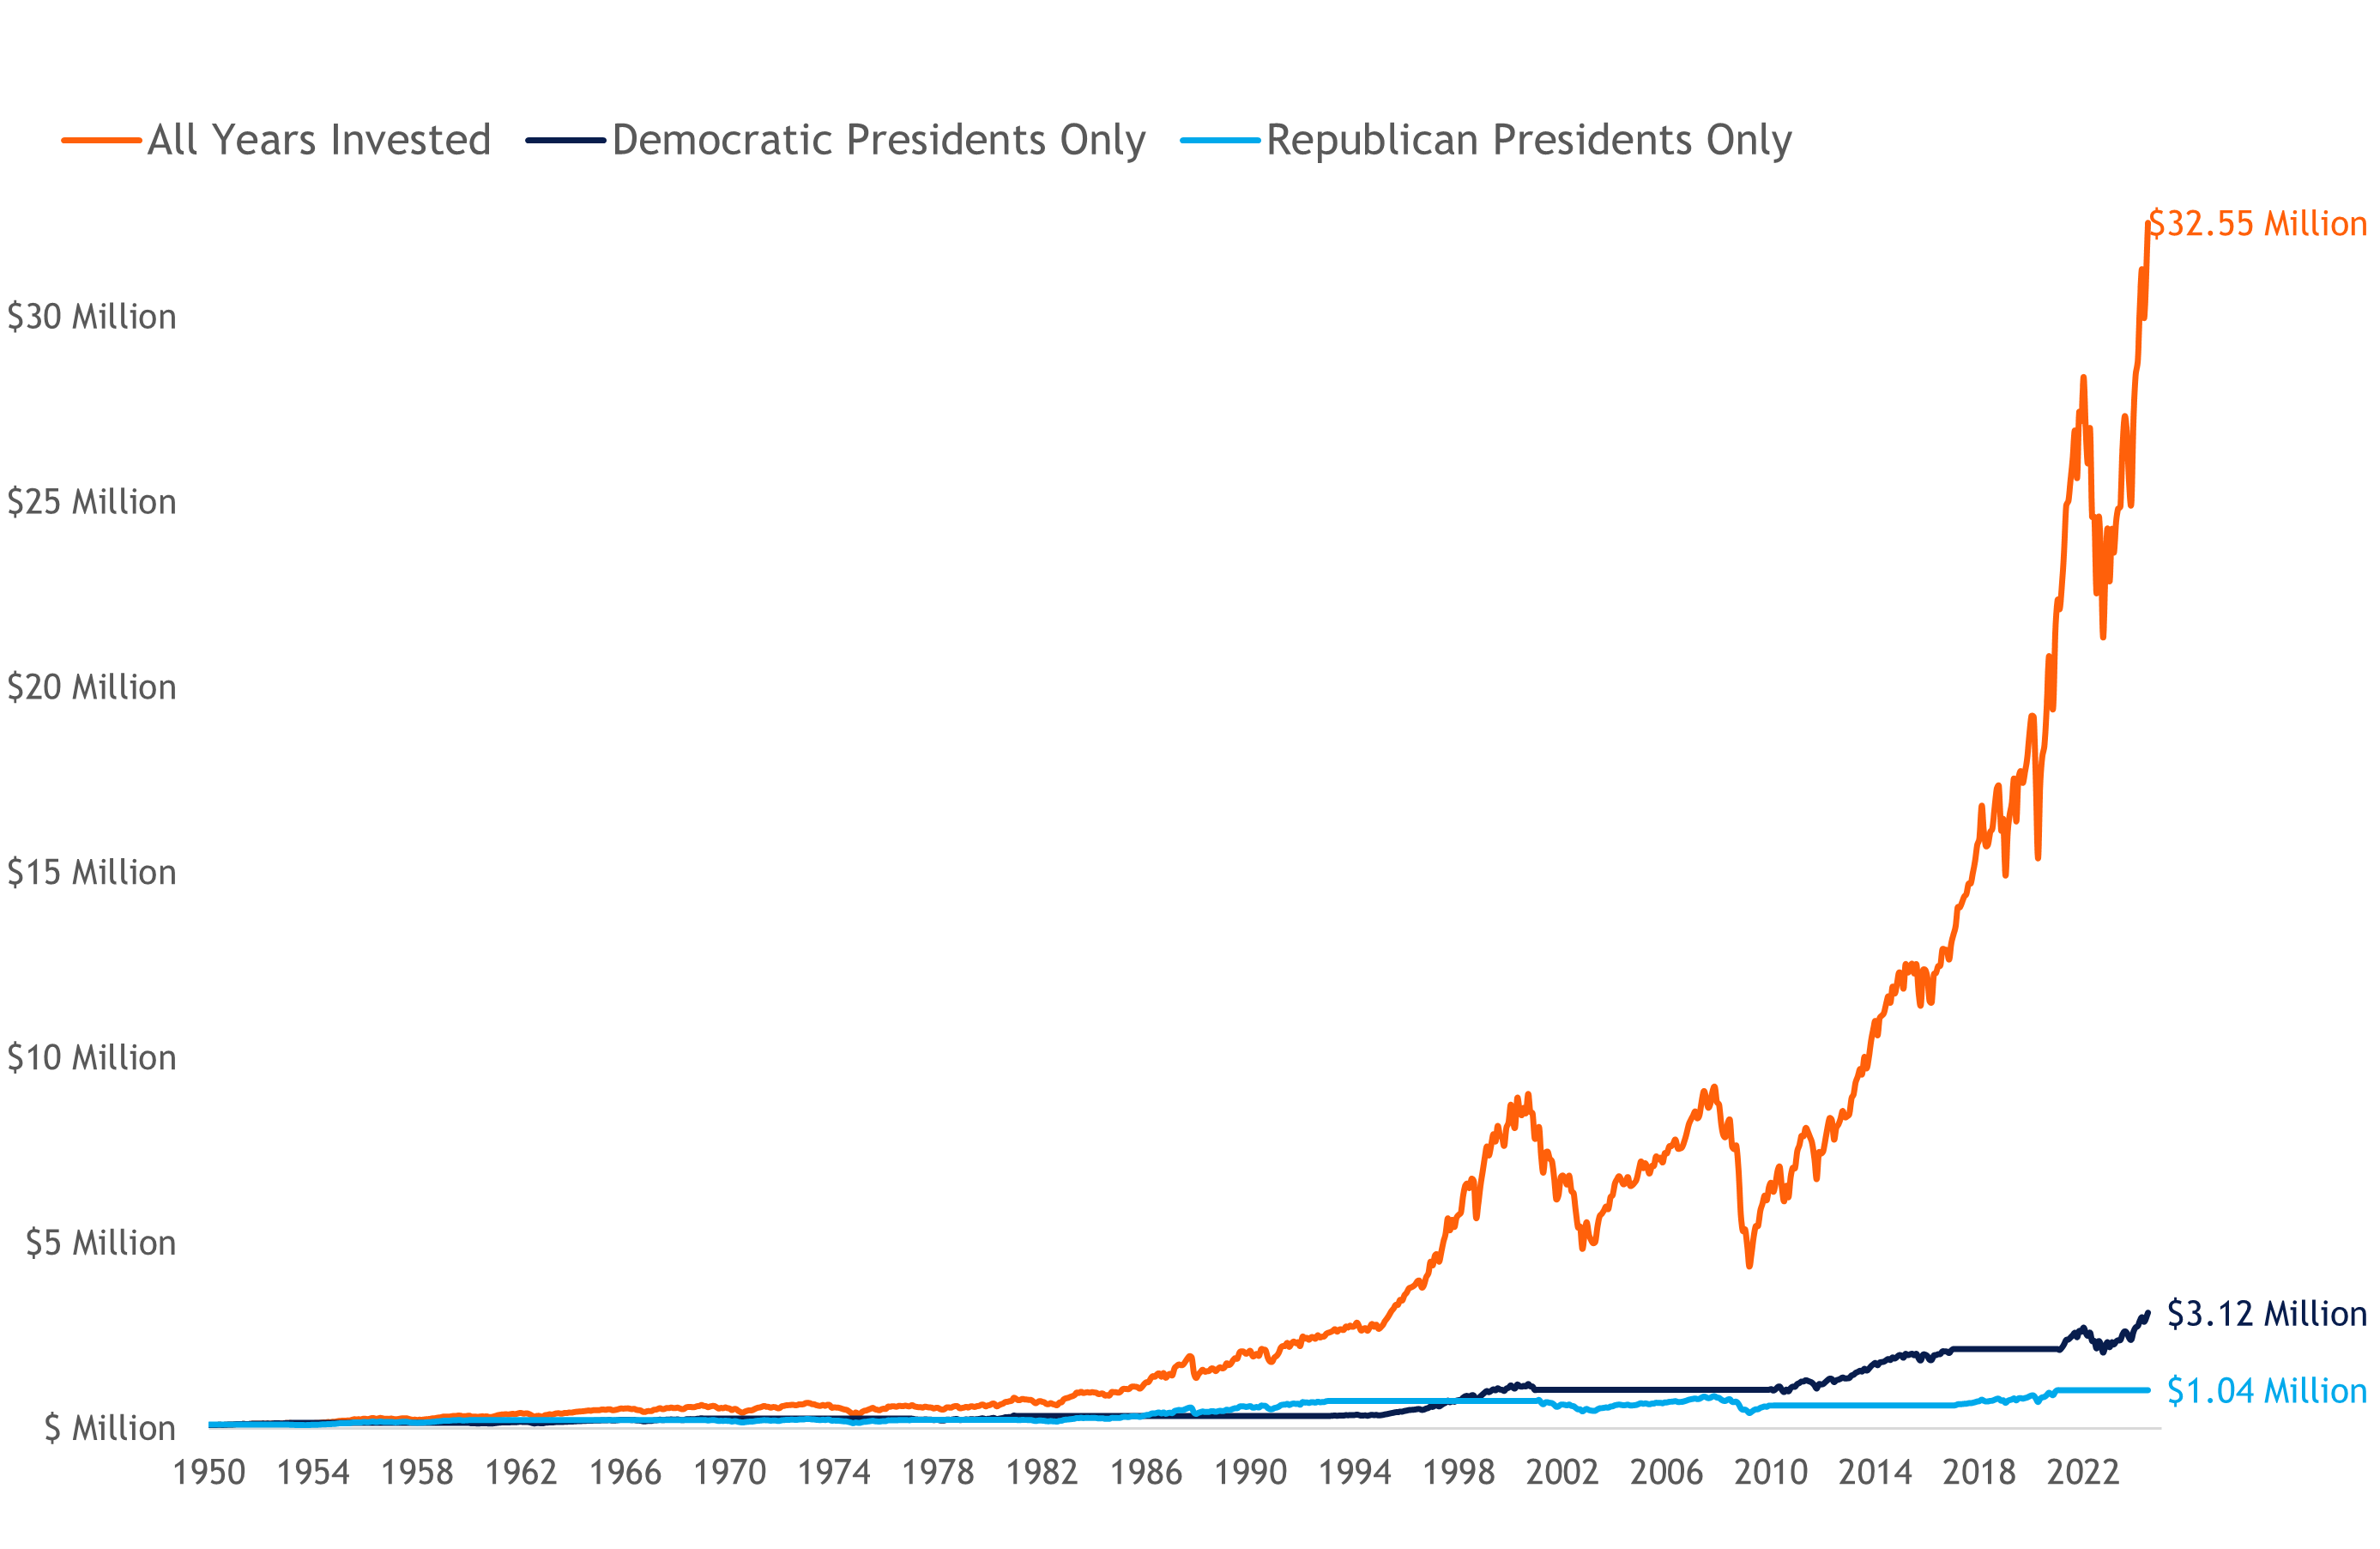 Finally, the chart indicates that the investment during Republican presidencies is significantly lower overall than during Democratic presidencies.